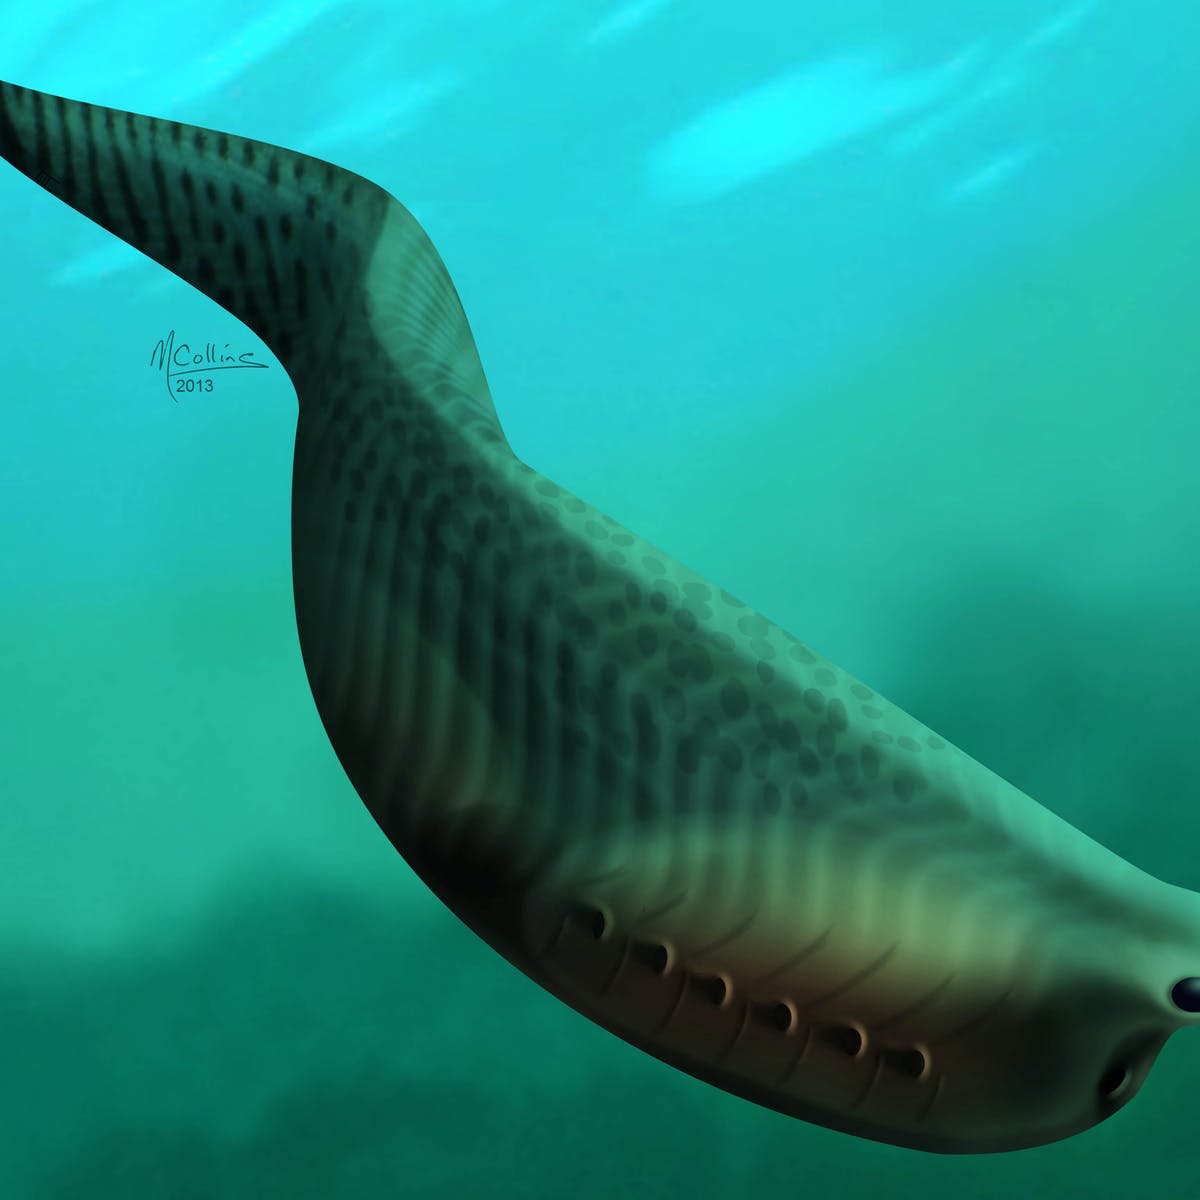 What is the earliest known fish?